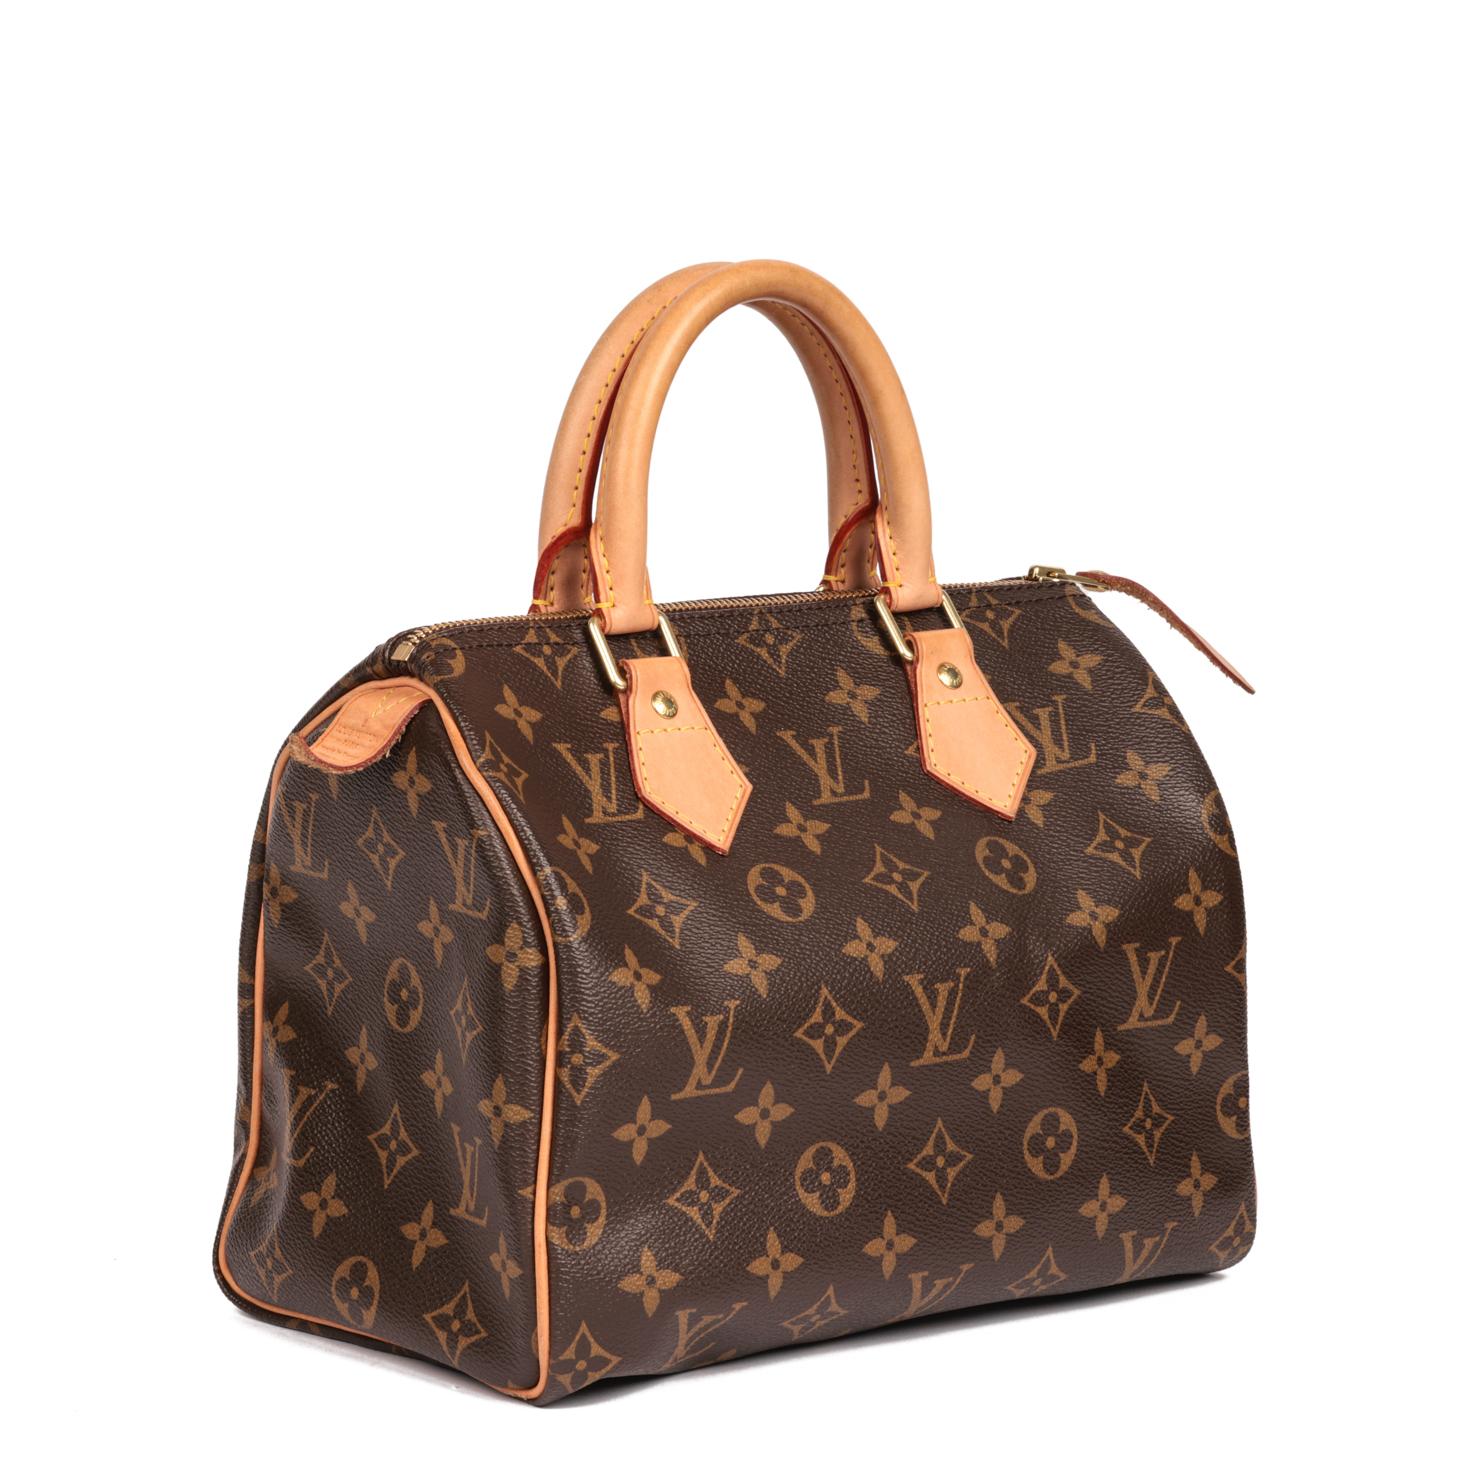 LOUIS VUITTON
Brown Monogram Coated Canvas & Vacehtta Leather Speedy 25

Xupes Reference: CB897
Serial Number: MB4130
Age (Circa): 2010
Accompanied By: Louis Vuitton Dust Bag, Padlock
Authenticity Details: Date Stamp (Made in France)
Gender: